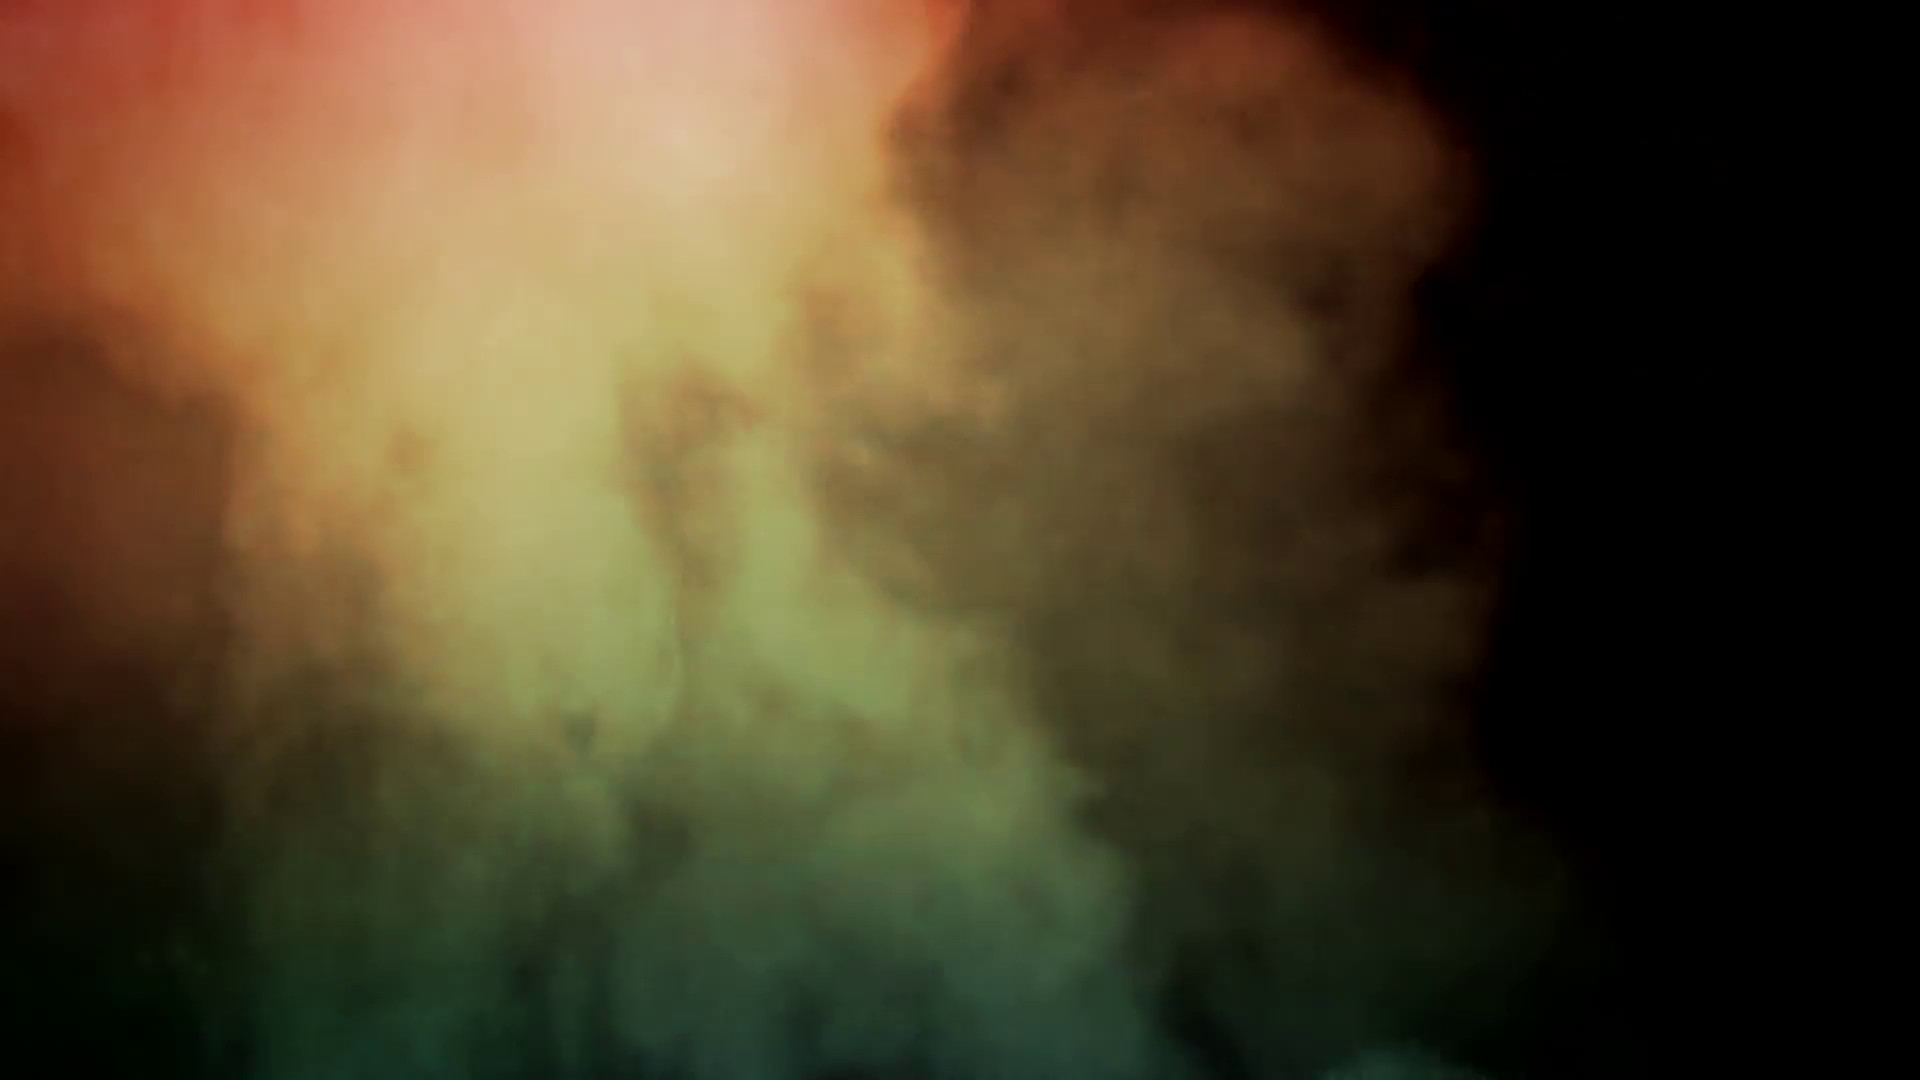 1920x1080 Smoke colorful retro vintage on black background. Abstract smoke background,  colored steam shapes rising